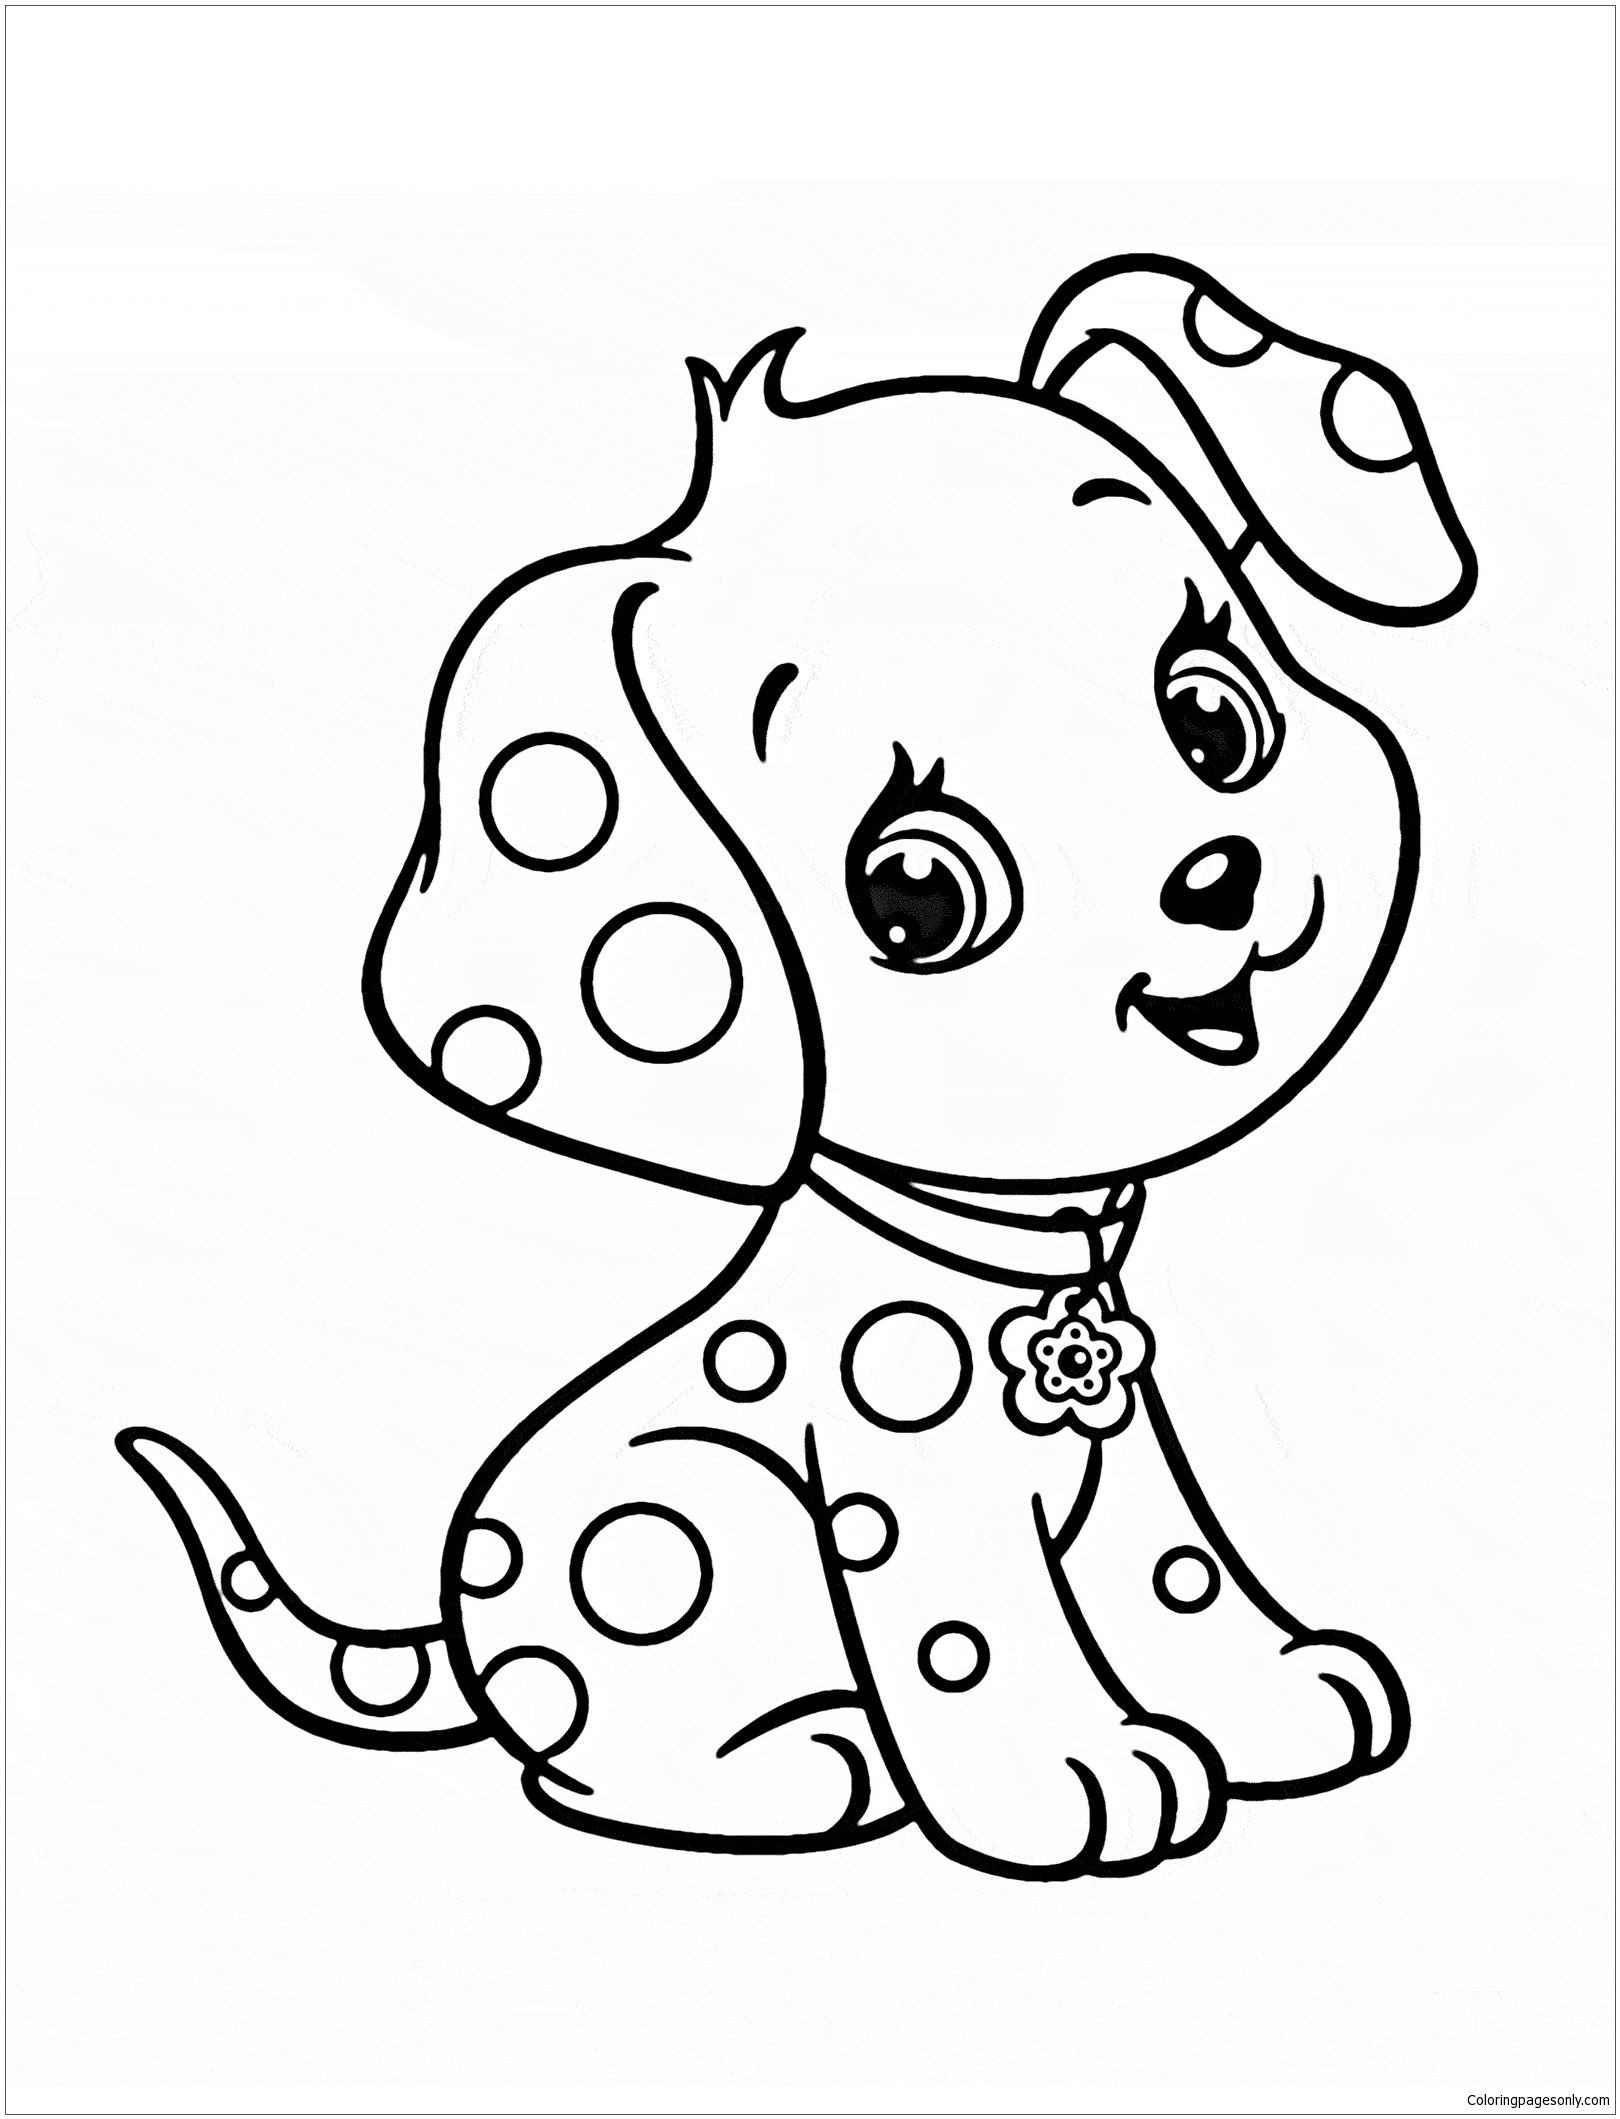 Printable Puppy Coloring Pages
 Cute Puppy 5 Coloring Page